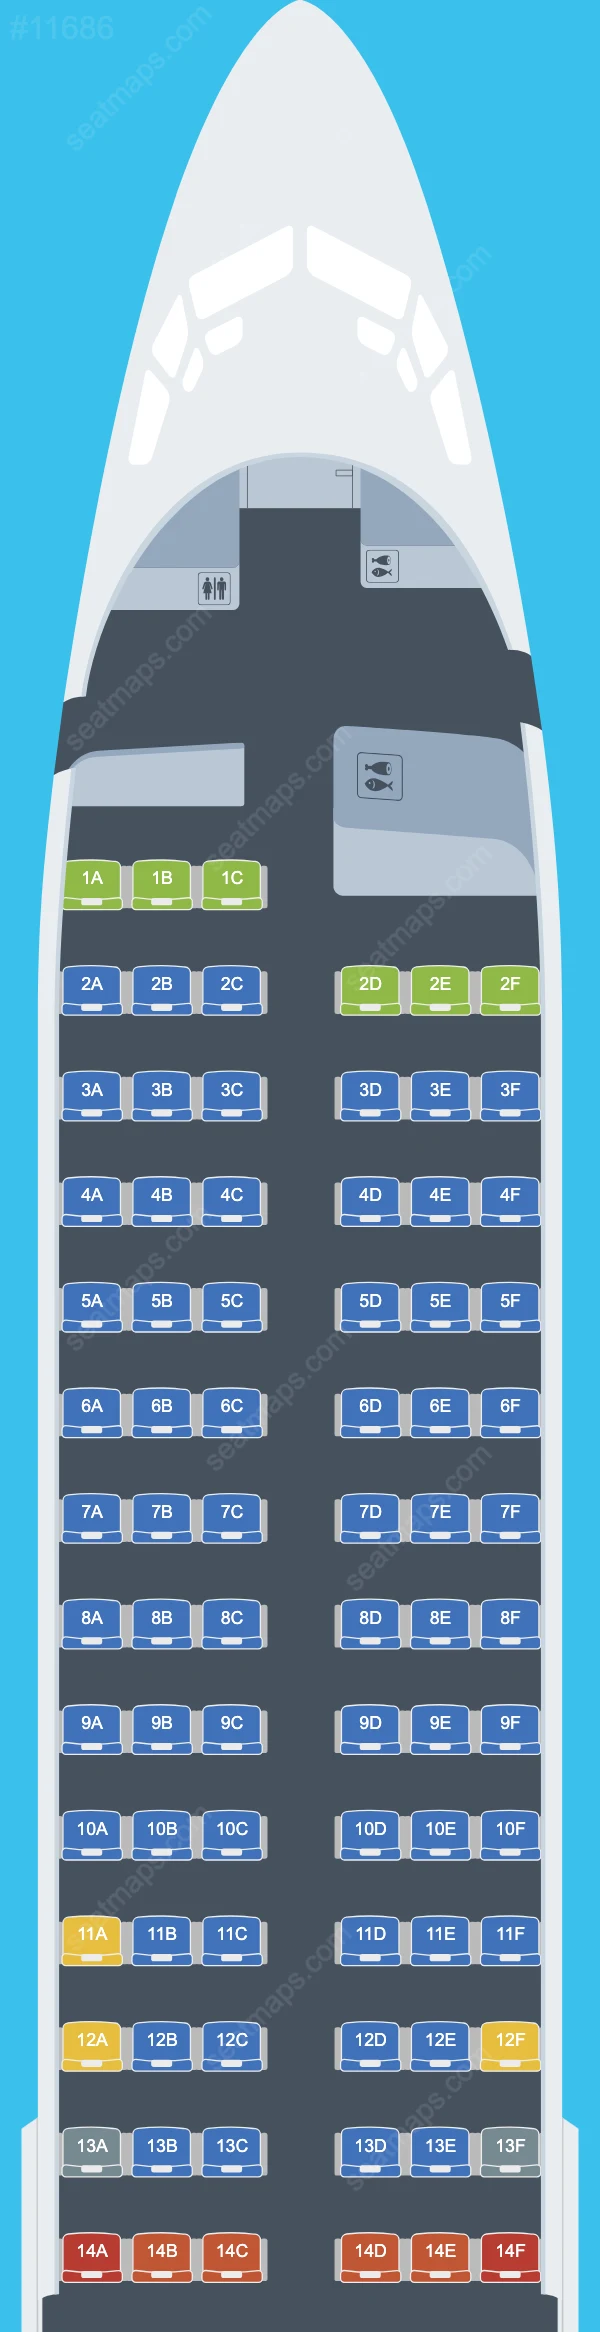 Eurowings Boeing 737 aircraft seat map  737-800 V.4